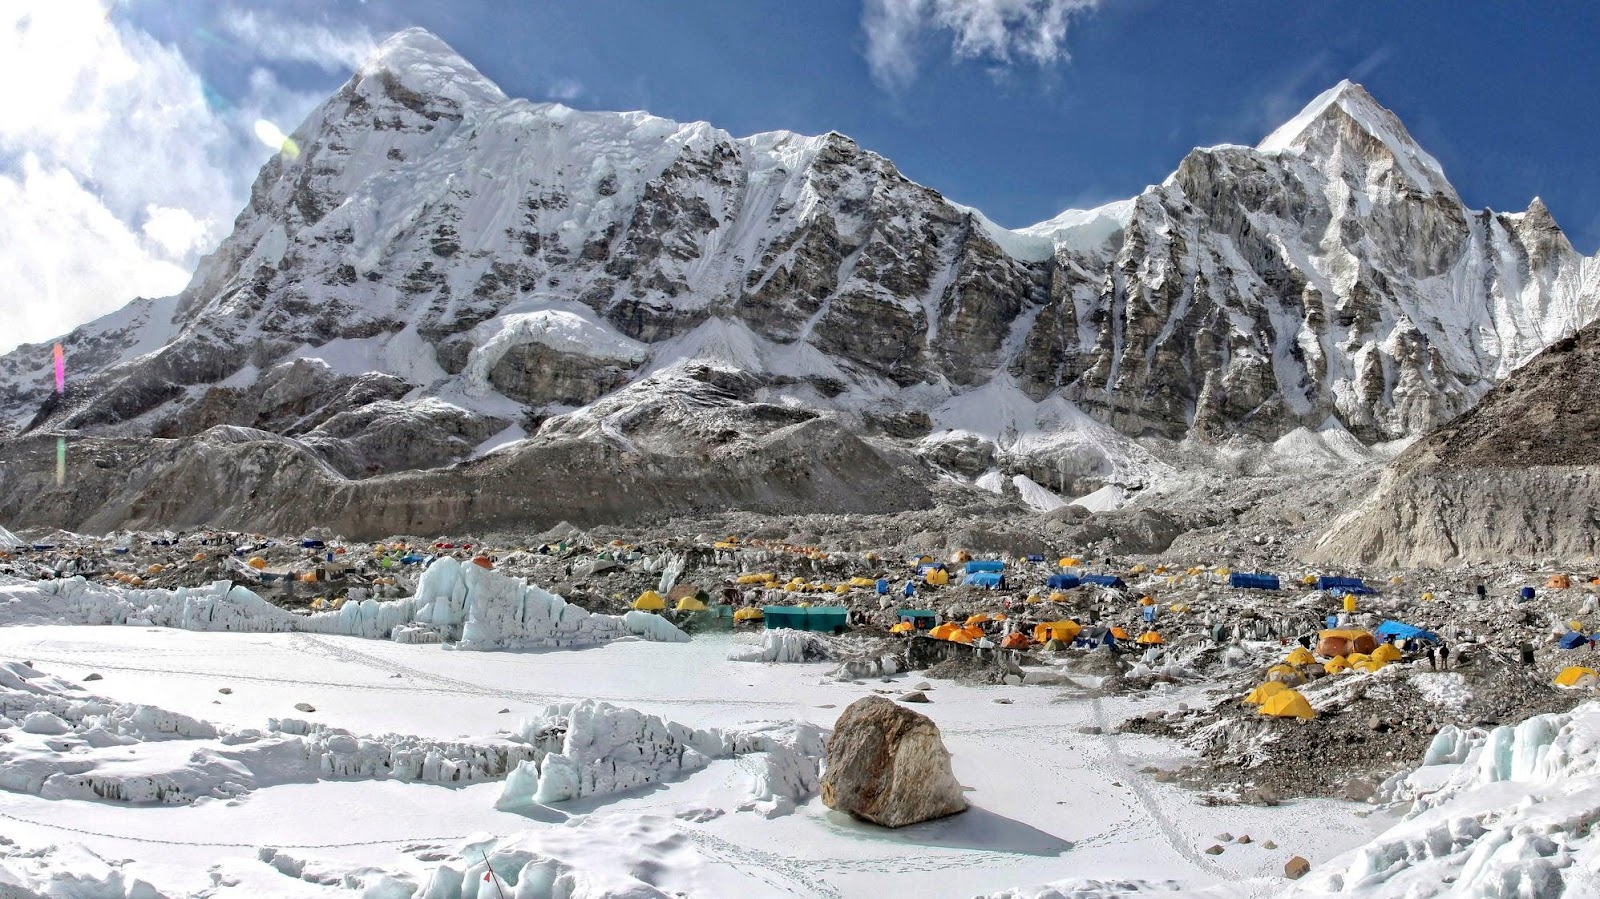  Types of Altitude Sickness You can Expect While Summiting Everest